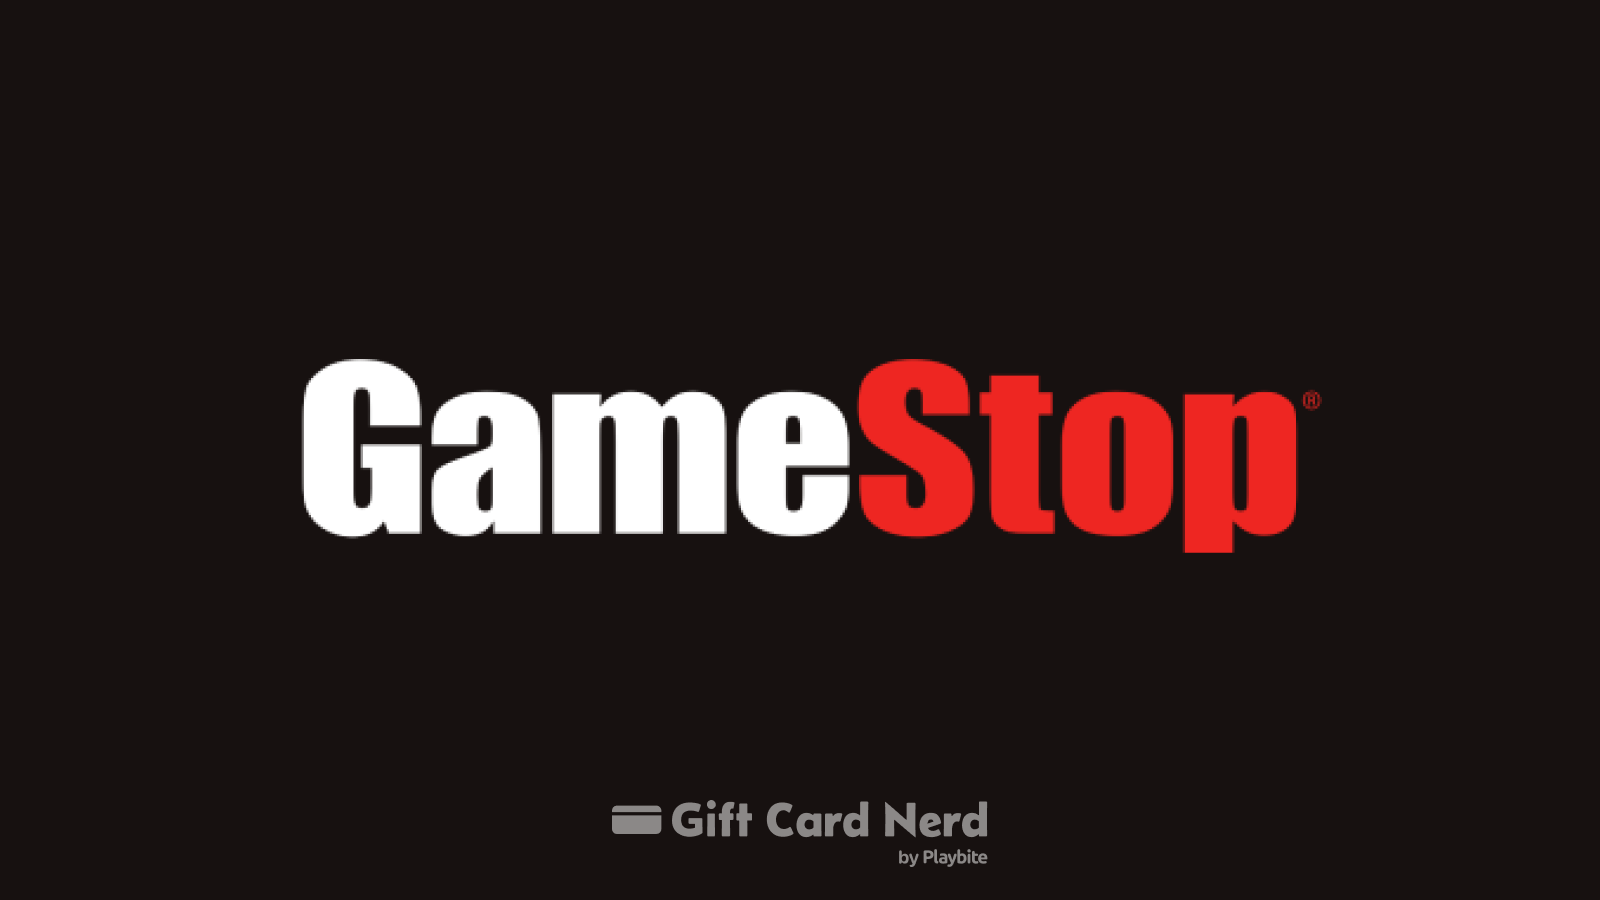 Can I use a GameStop gift card on DoorDash?